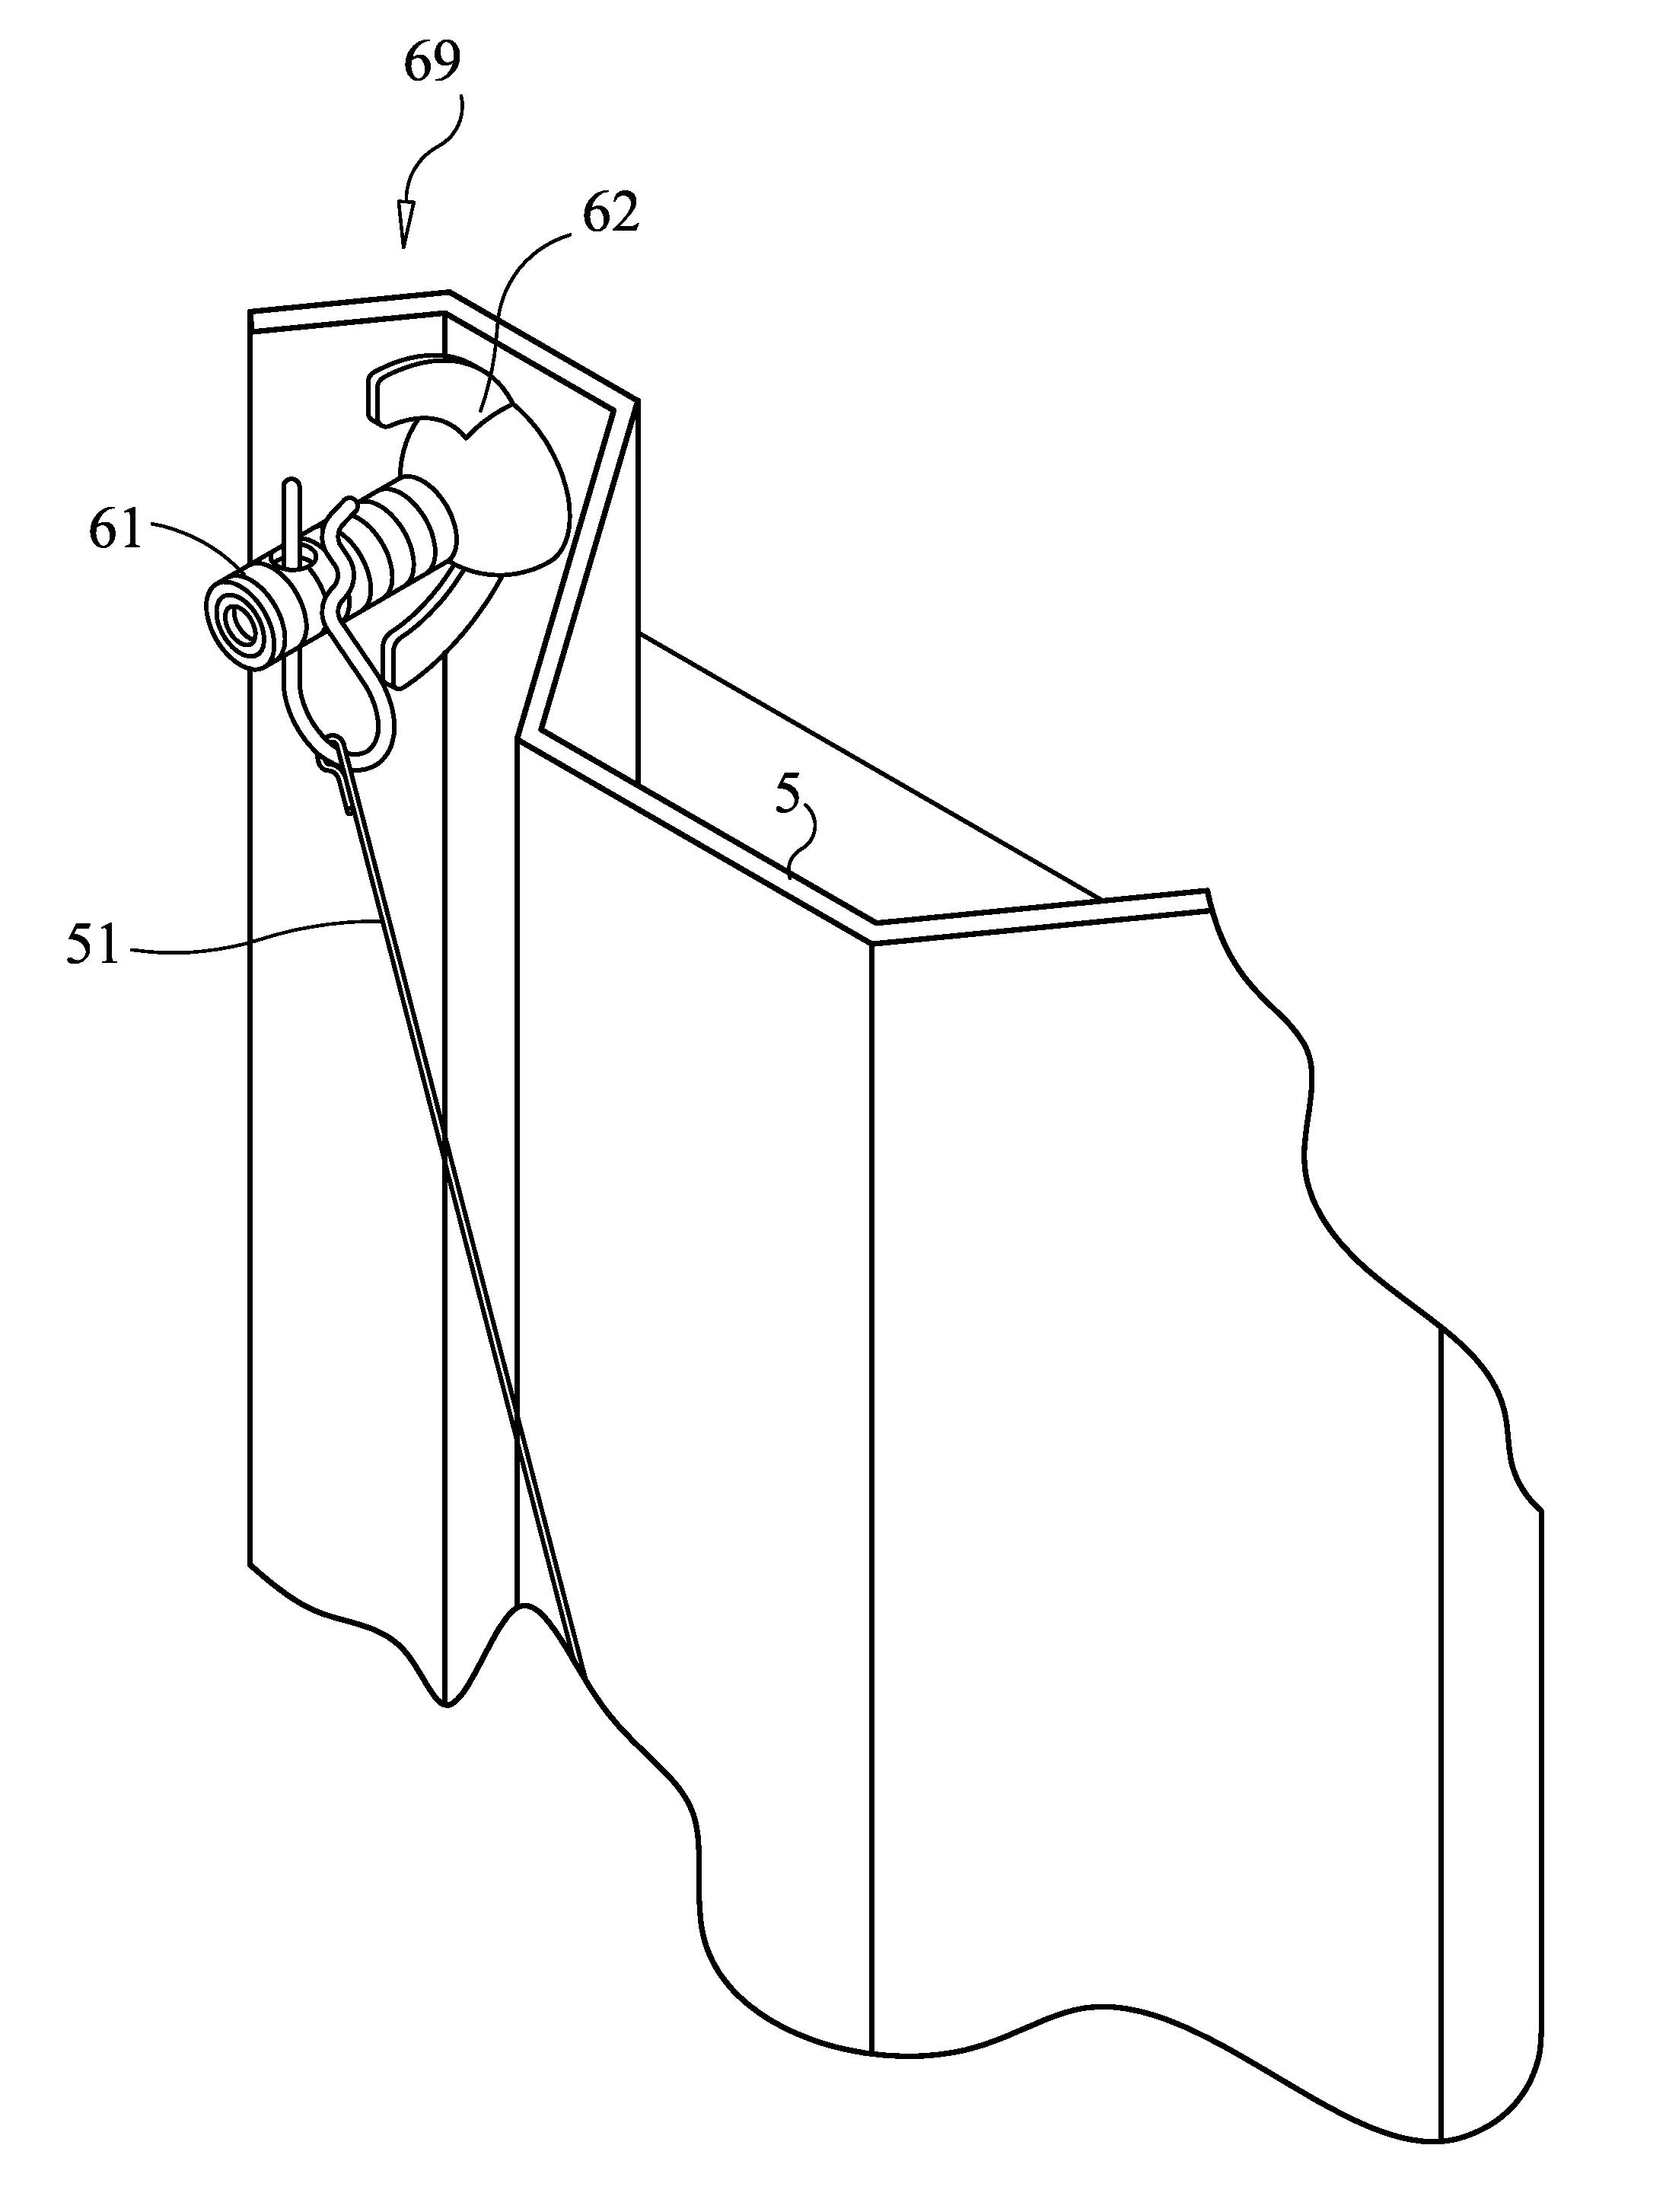 System and method for attaching panels to enable removal from the inside of a structure